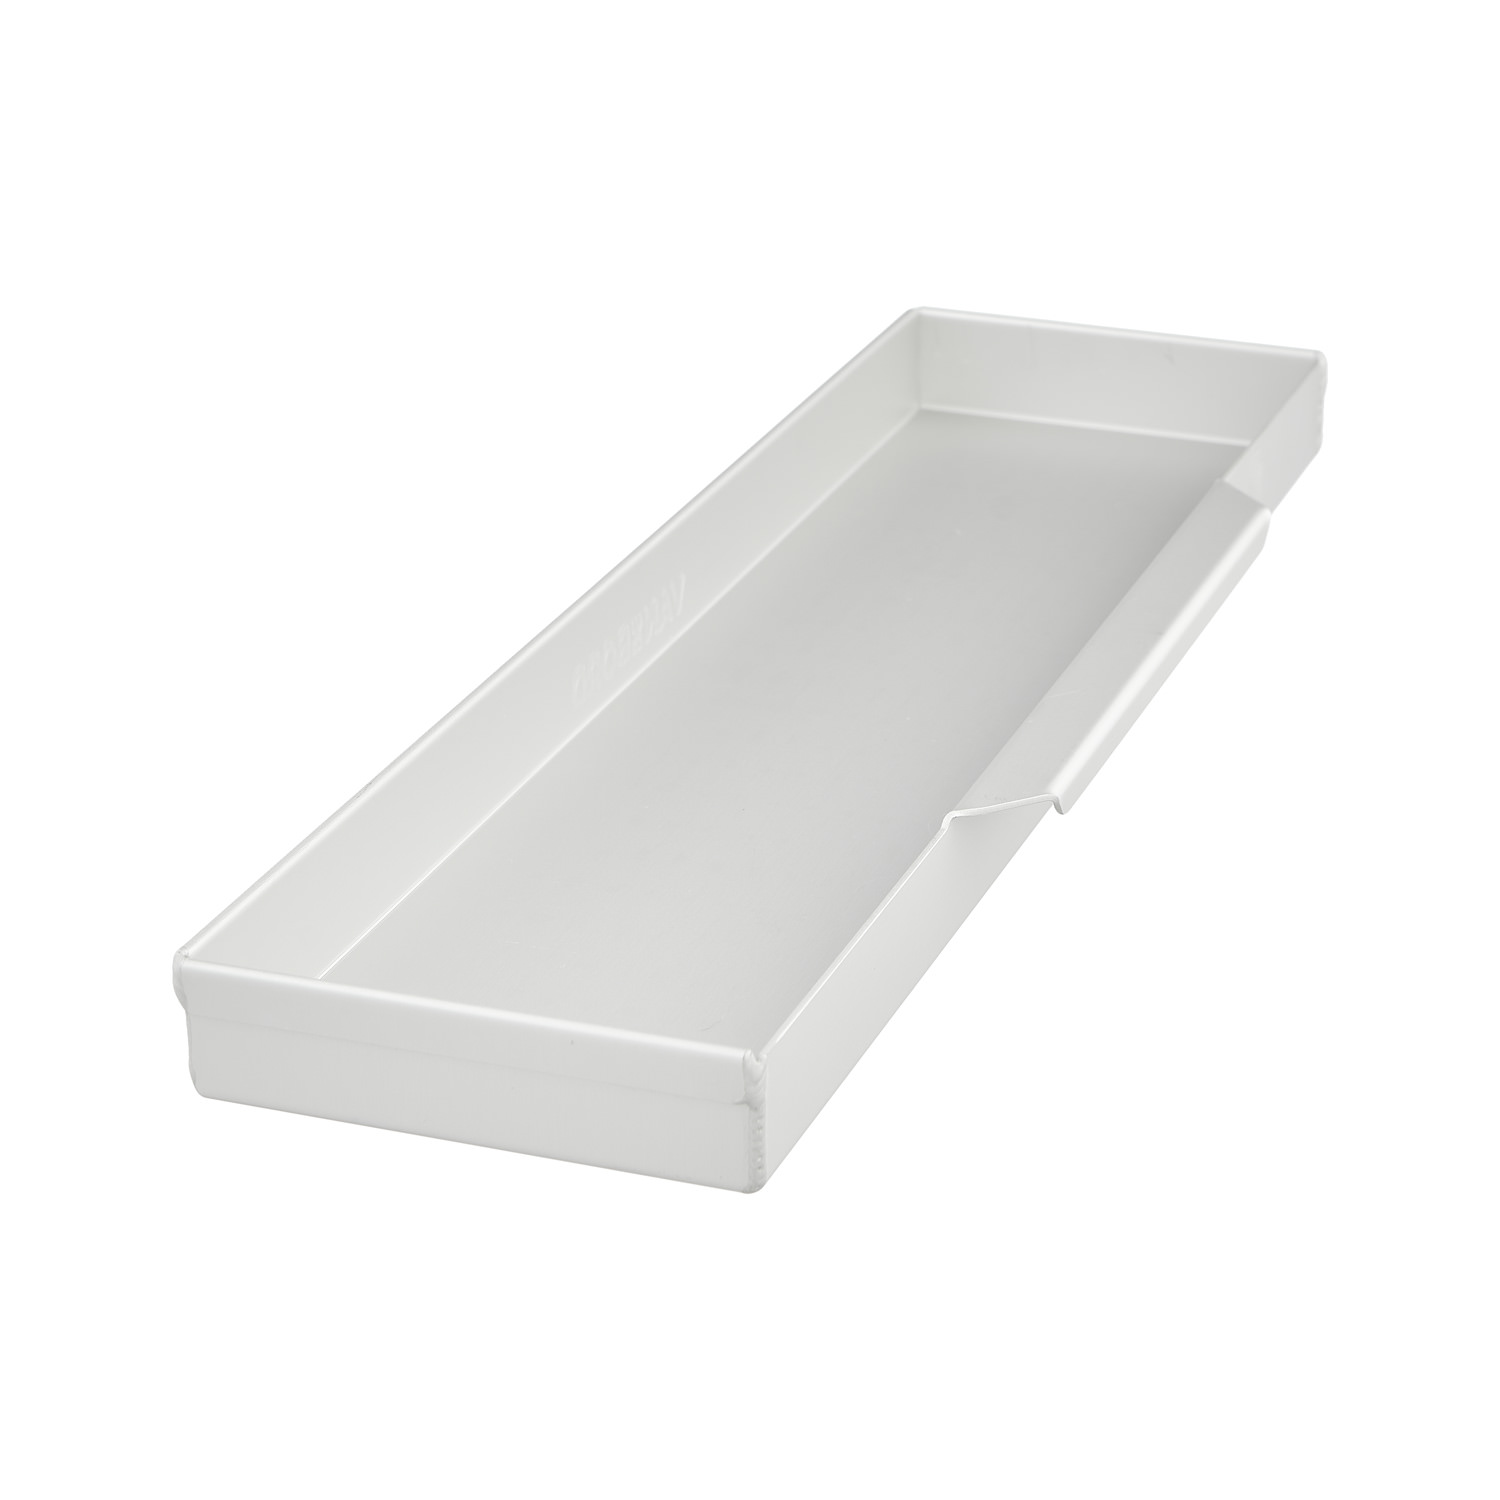 Sidebox for Airline Trolleys 40.0 x 11.0 x 3.0 cm